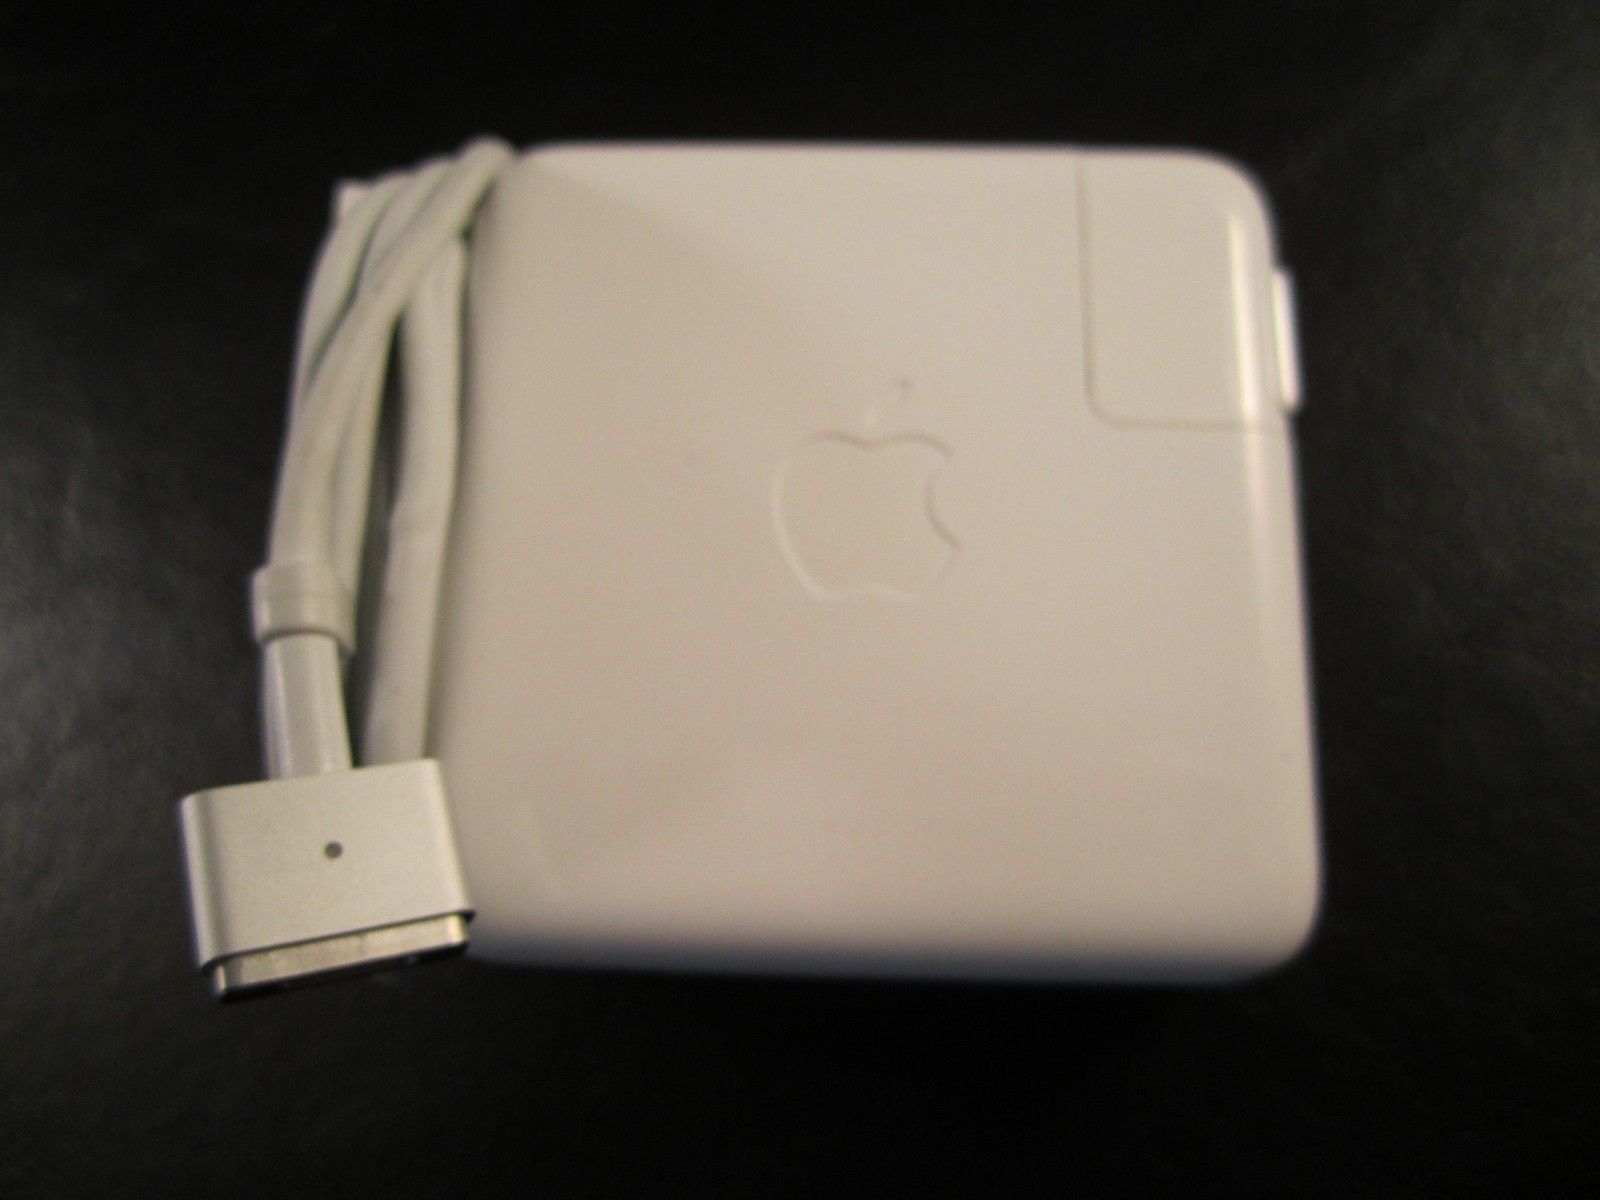 Аккумулятор apple magsafe battery. Apple MAGSAFE Battery Pack. Apple MAGSAFE Charger 60w. Повербанк Apple MAGSAFE Battery Pack. MAGSAFE Charger mhxh3ze/a.